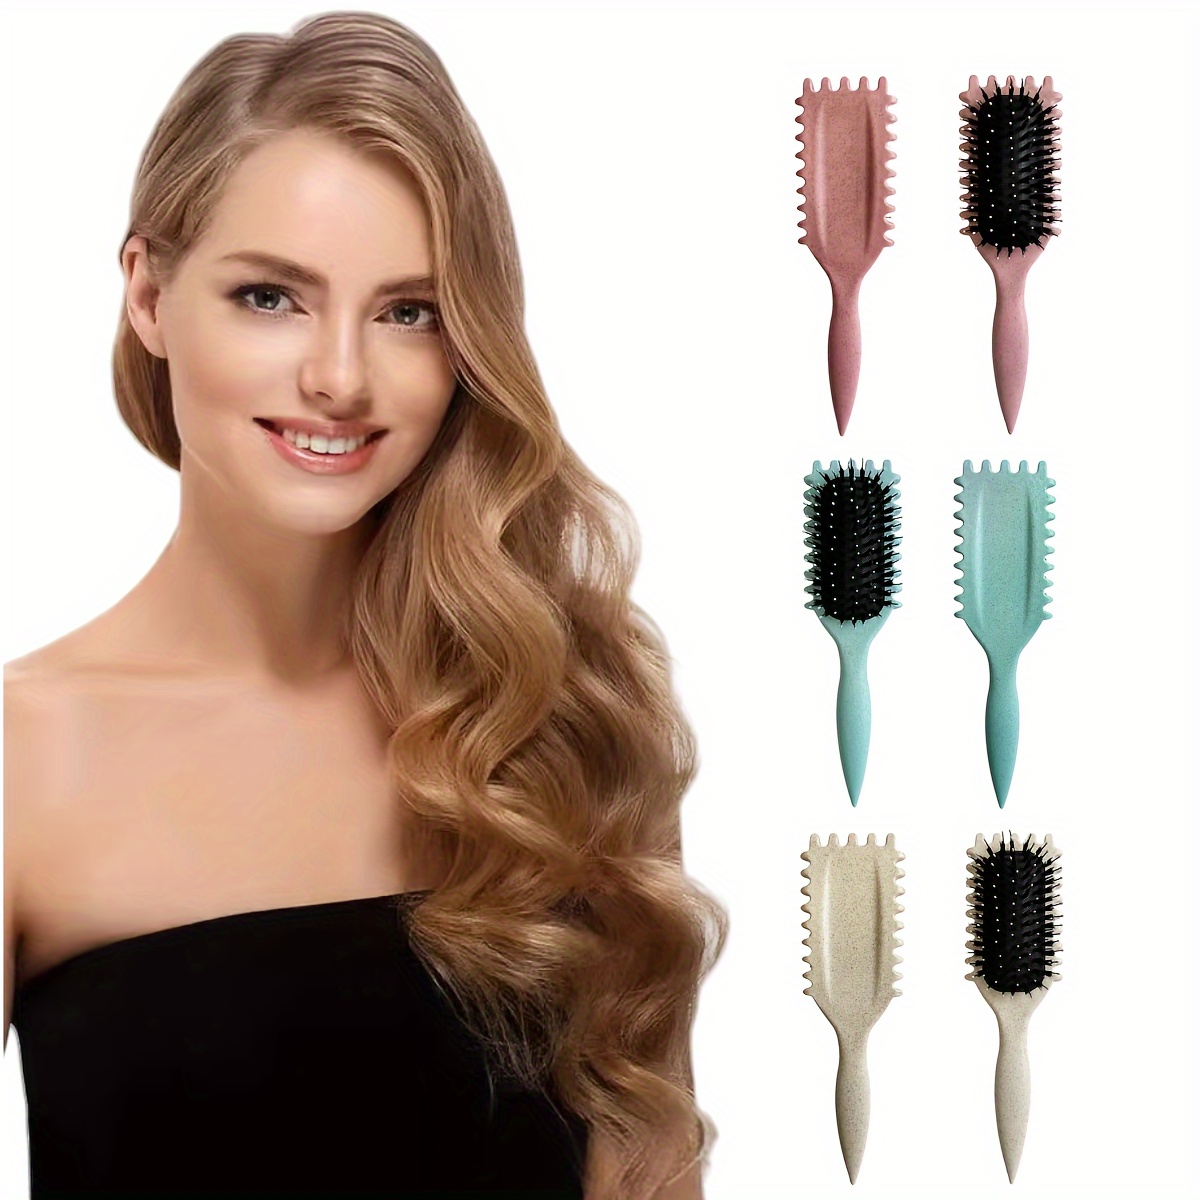 

1pc Women's Air Cushion Comb - Nylon Bristles For All Hair Types, Detangling & Styling Brush With Abs Handle